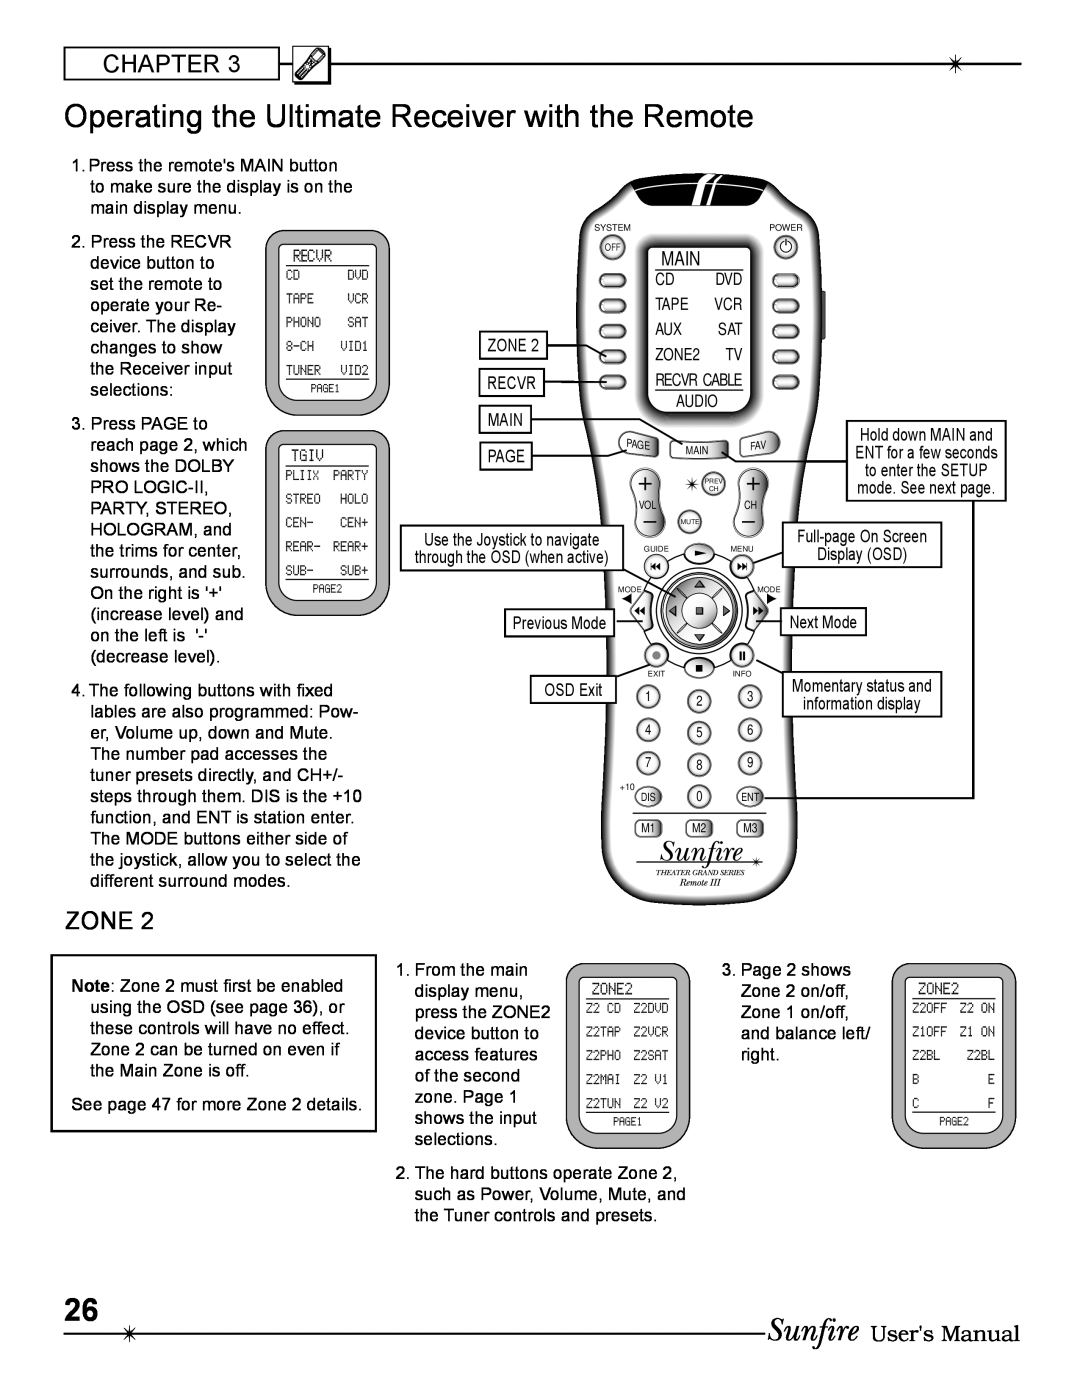 Sunfire Radio manual Operating the Ultimate Receiver with the Remote, Chapter, Zone, Main 